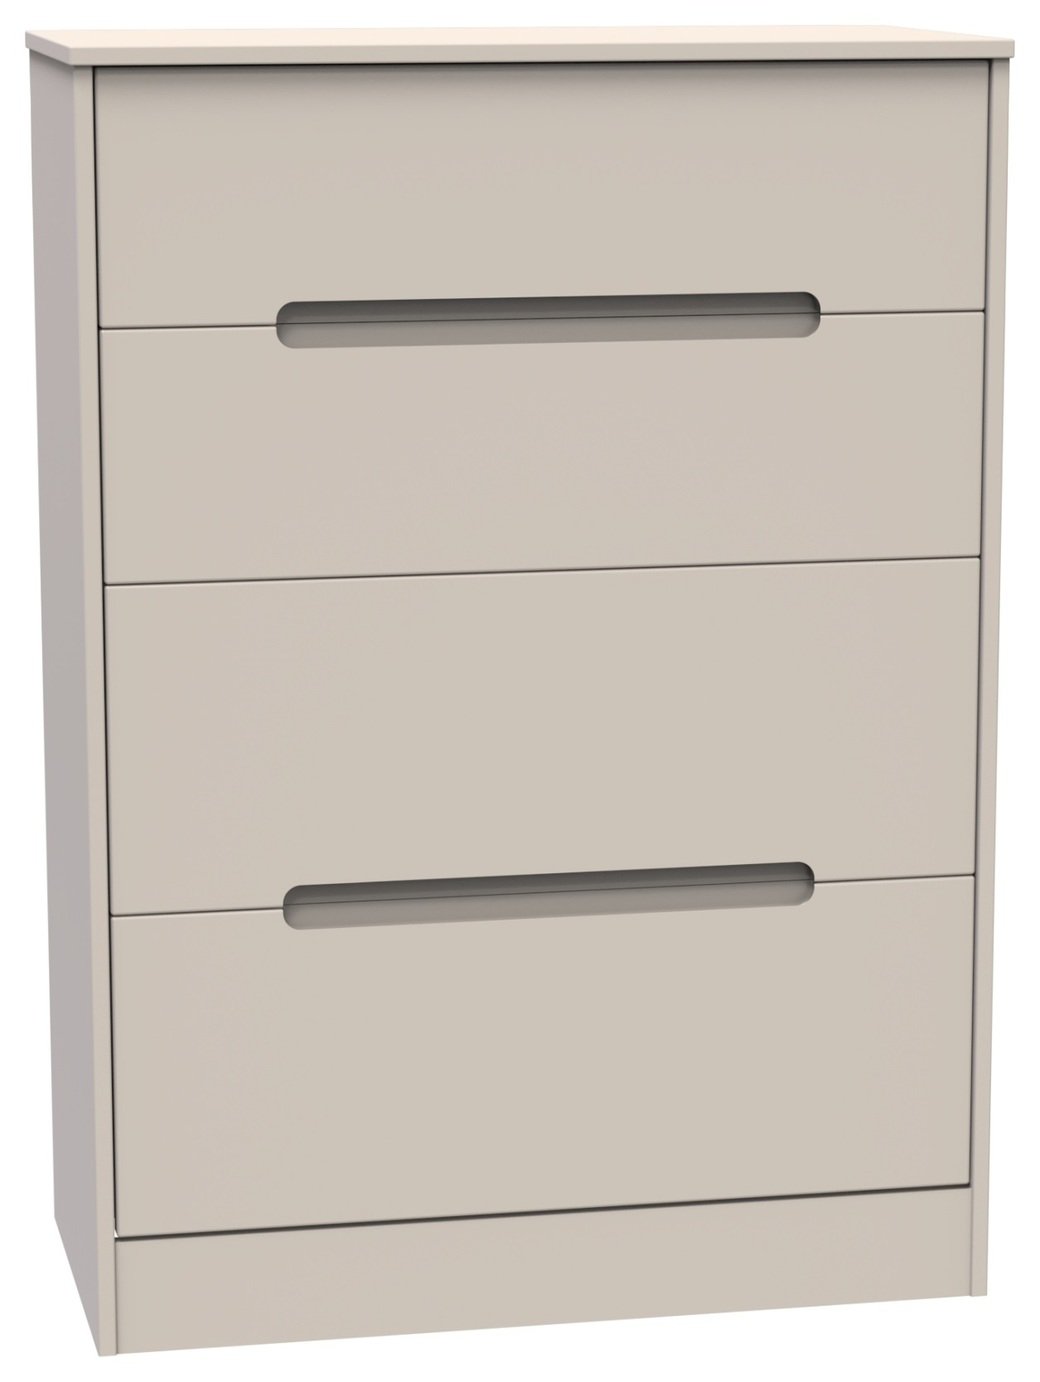 Toulouse 4 Drawer Chest - Cashmere